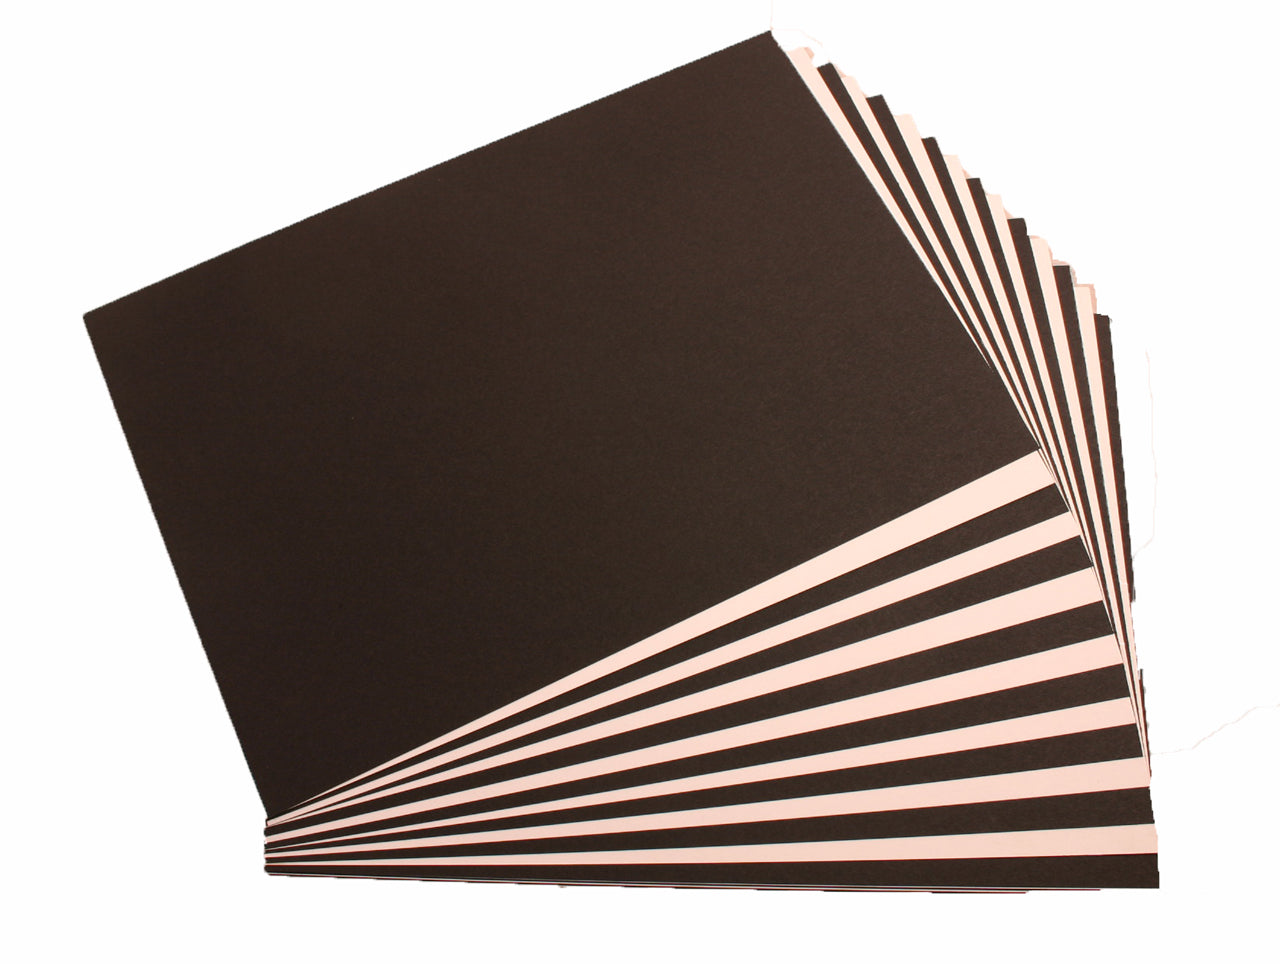 Alternating sheets of black and white card